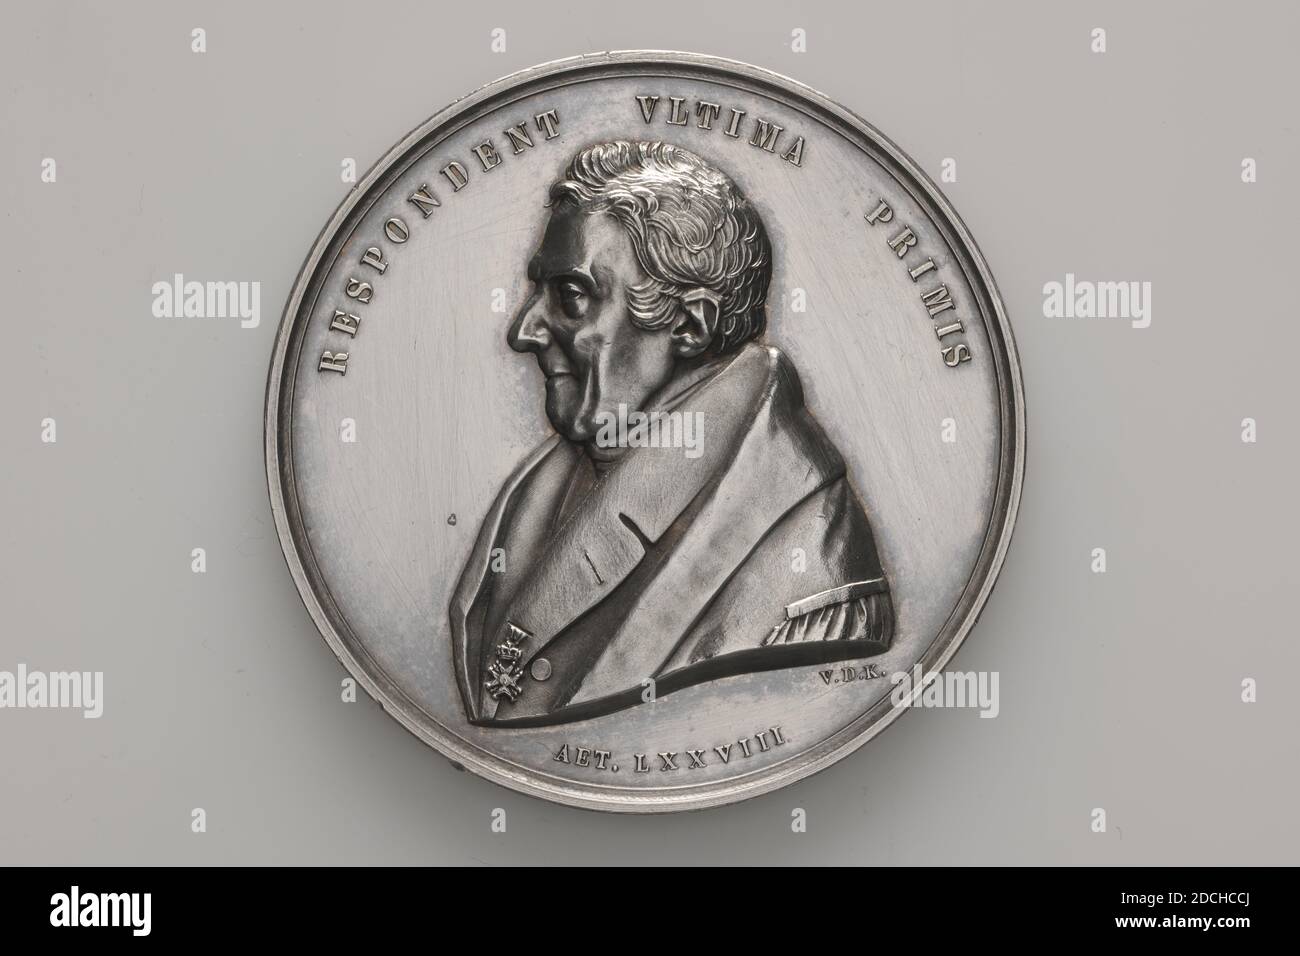 medal, David van der Kellen II, 1851, minted, General: 5.2 x 0.4cm (52 x 4mm), Weight: 54.1g, man's portrait, bust, Silver commemorative medal in honor of the 50th anniversary of C.G.C. Reinwardt (1773-1854), professor of natural history. Professor C.G.C. Reinwardt was director of Agriculture, Arts and Sciences in Java. He created a botanical garden in Buitenzorg and a natural history collection. He also collected archaeological objects, many of which ended up in the collection of the Rijksmuseum voor Oudheden in Leiden during the 19th century. On the front a portrait and profile to the left Stock Photo